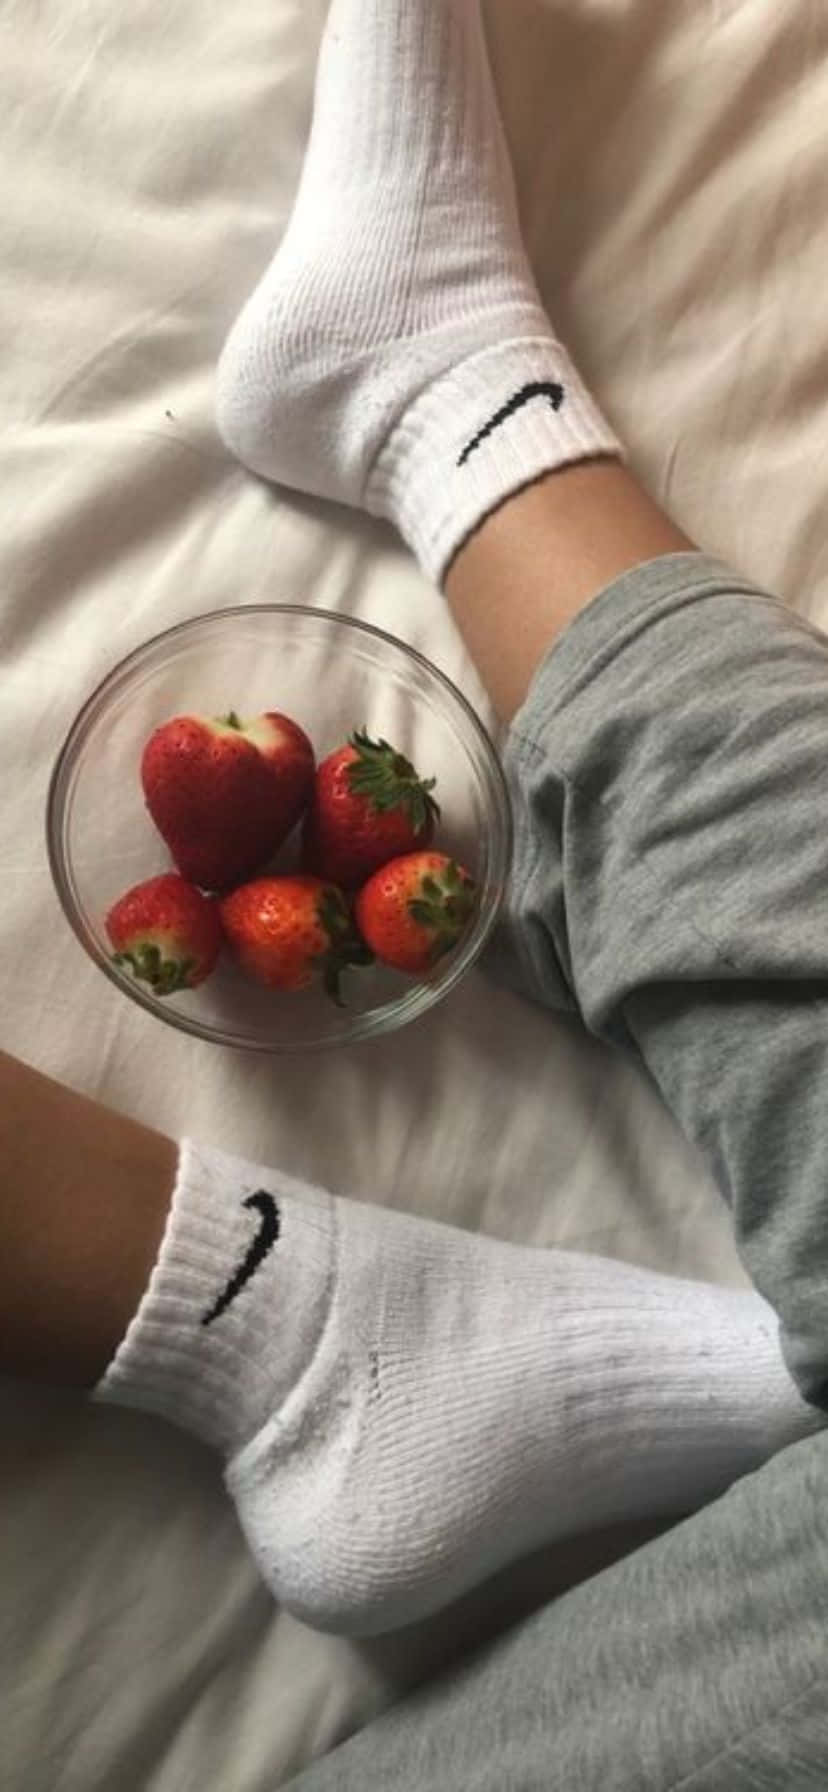 Relaxed Momentwith Strawberriesand Socks Wallpaper